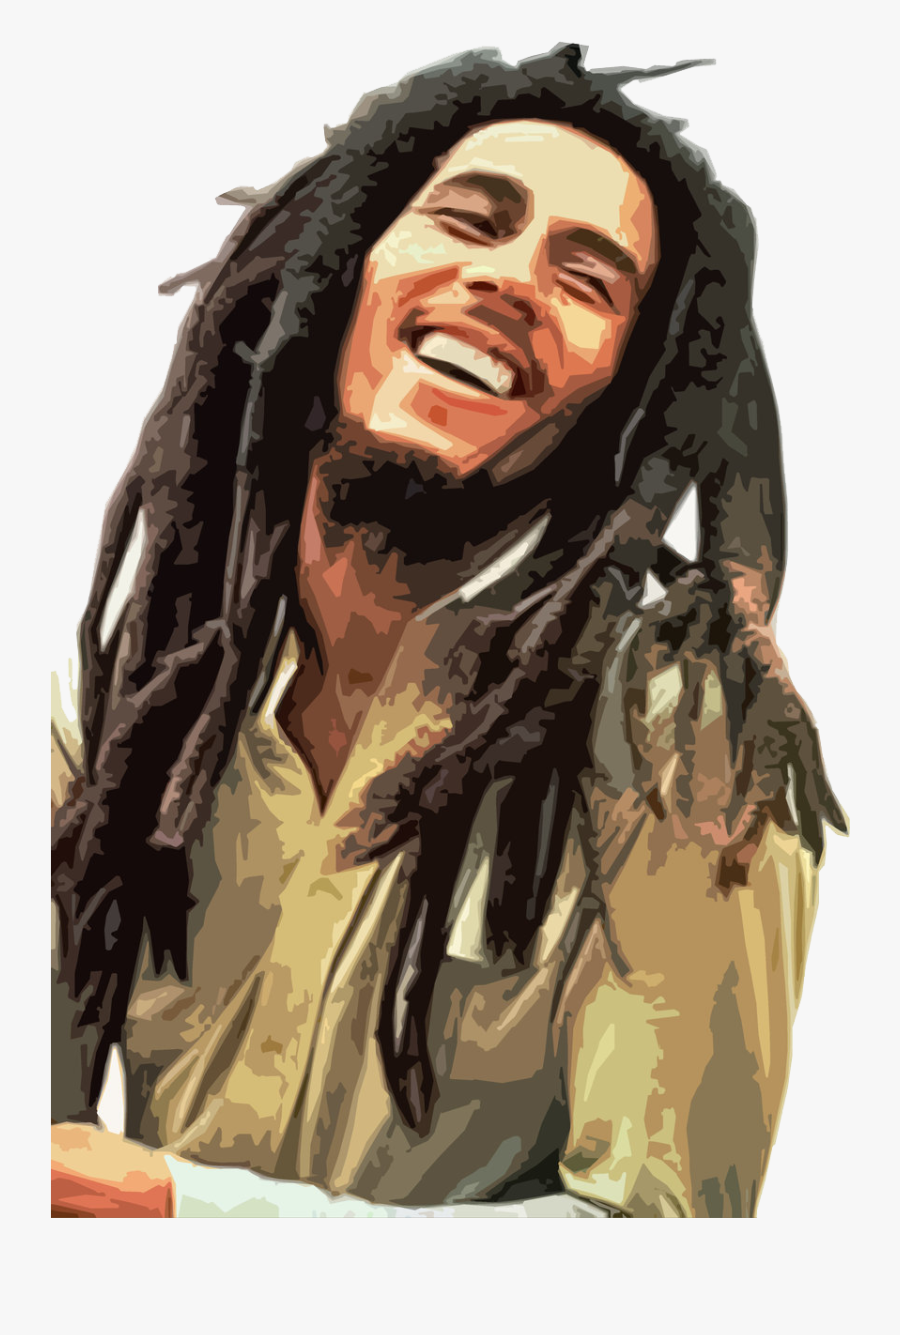 Download Bob Marley Png Image For Designing Projects - Bob Marley, Transparent Clipart